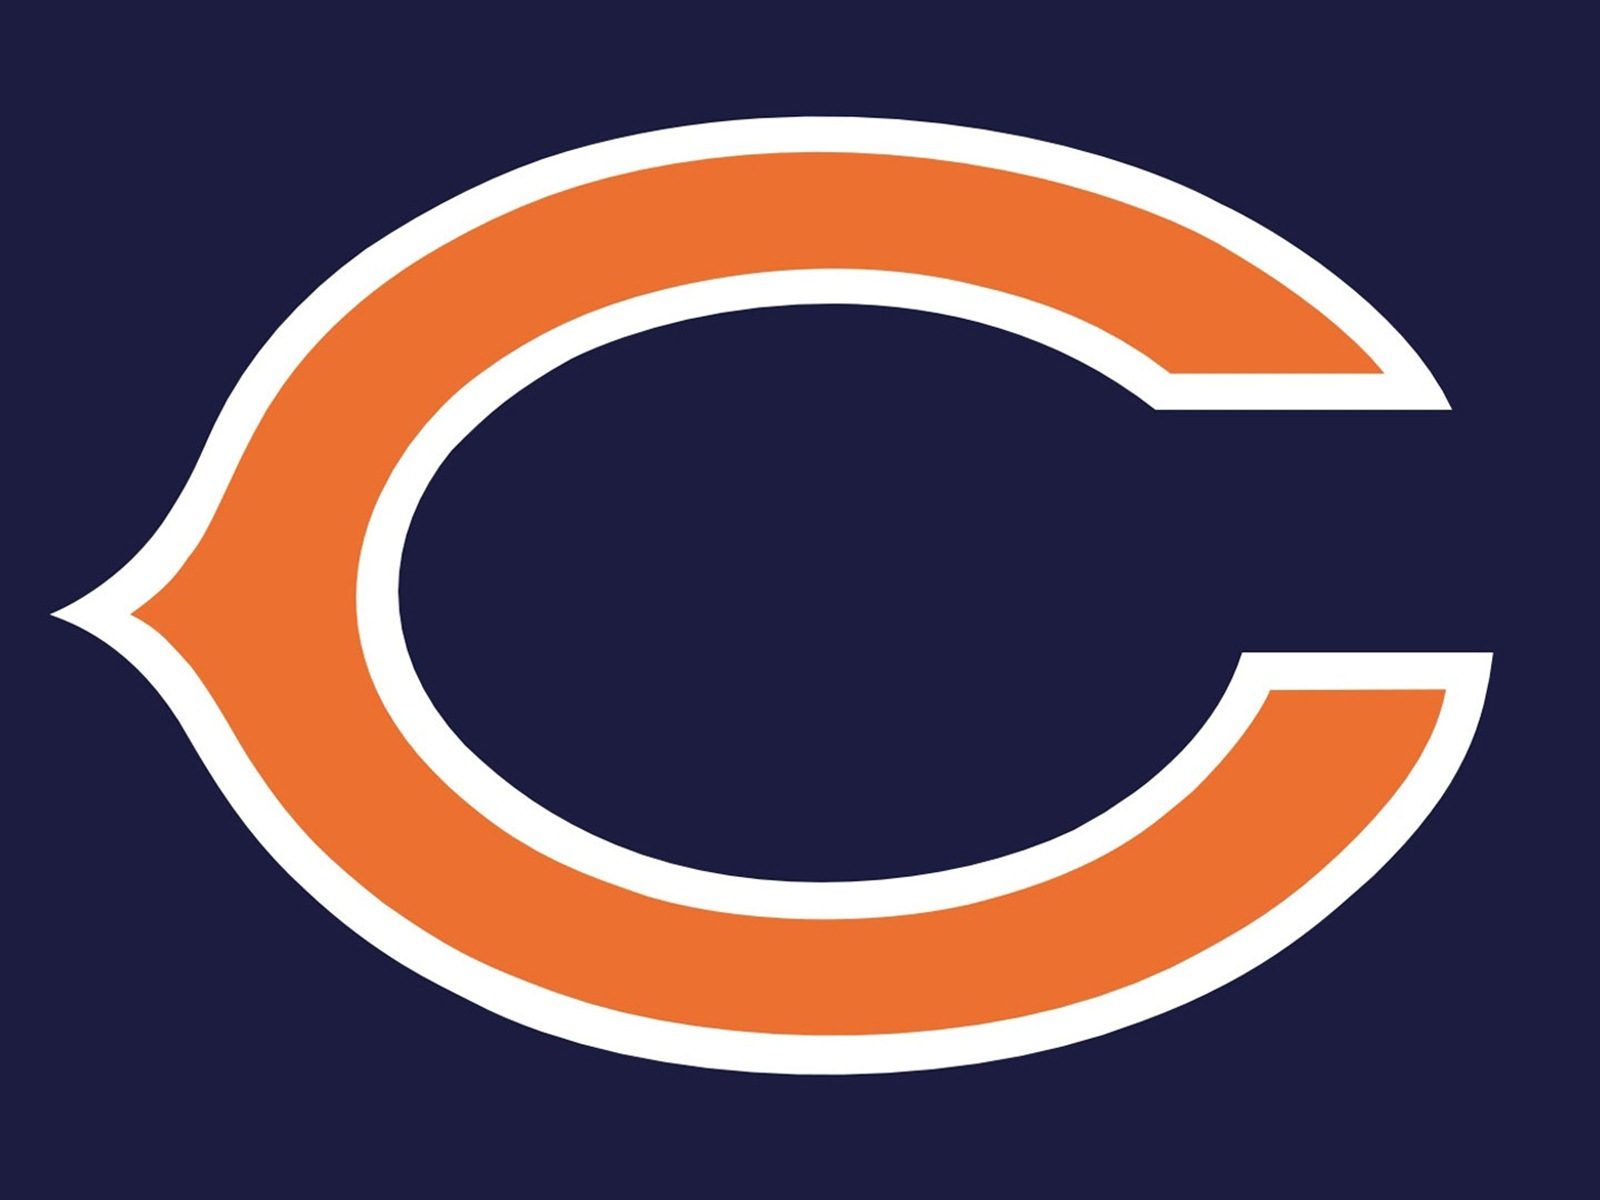 Chicago Bears trade Dick Butkus fires shot at Detroit Lions Justin Fields expected to play Justin Fields says Bears should have beaten Detroit Lions